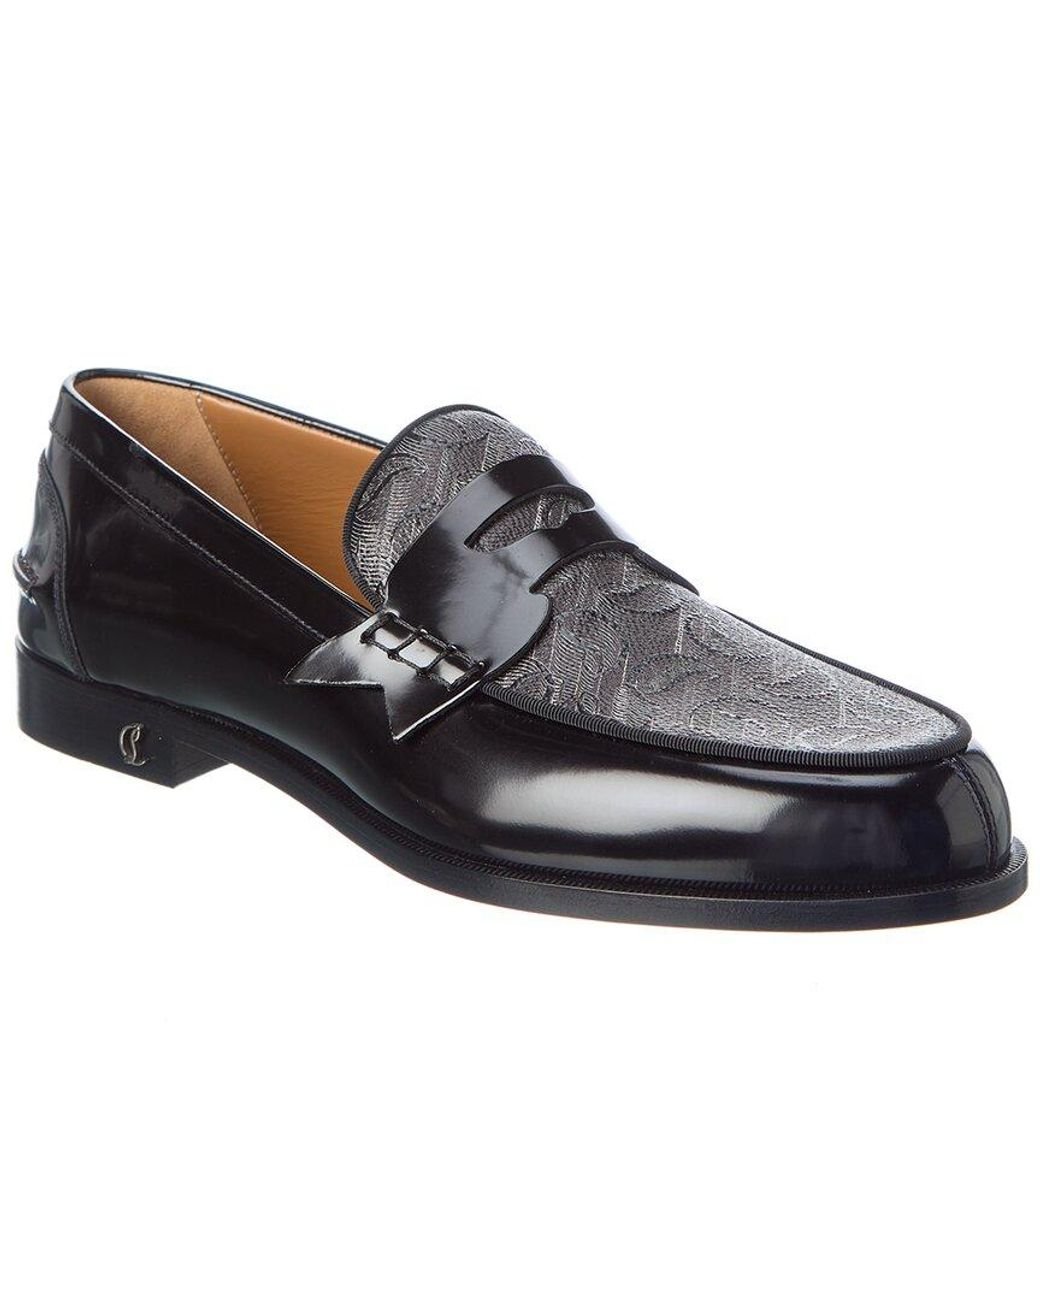 Louis Vuitton Patent Leather Loafers for Men